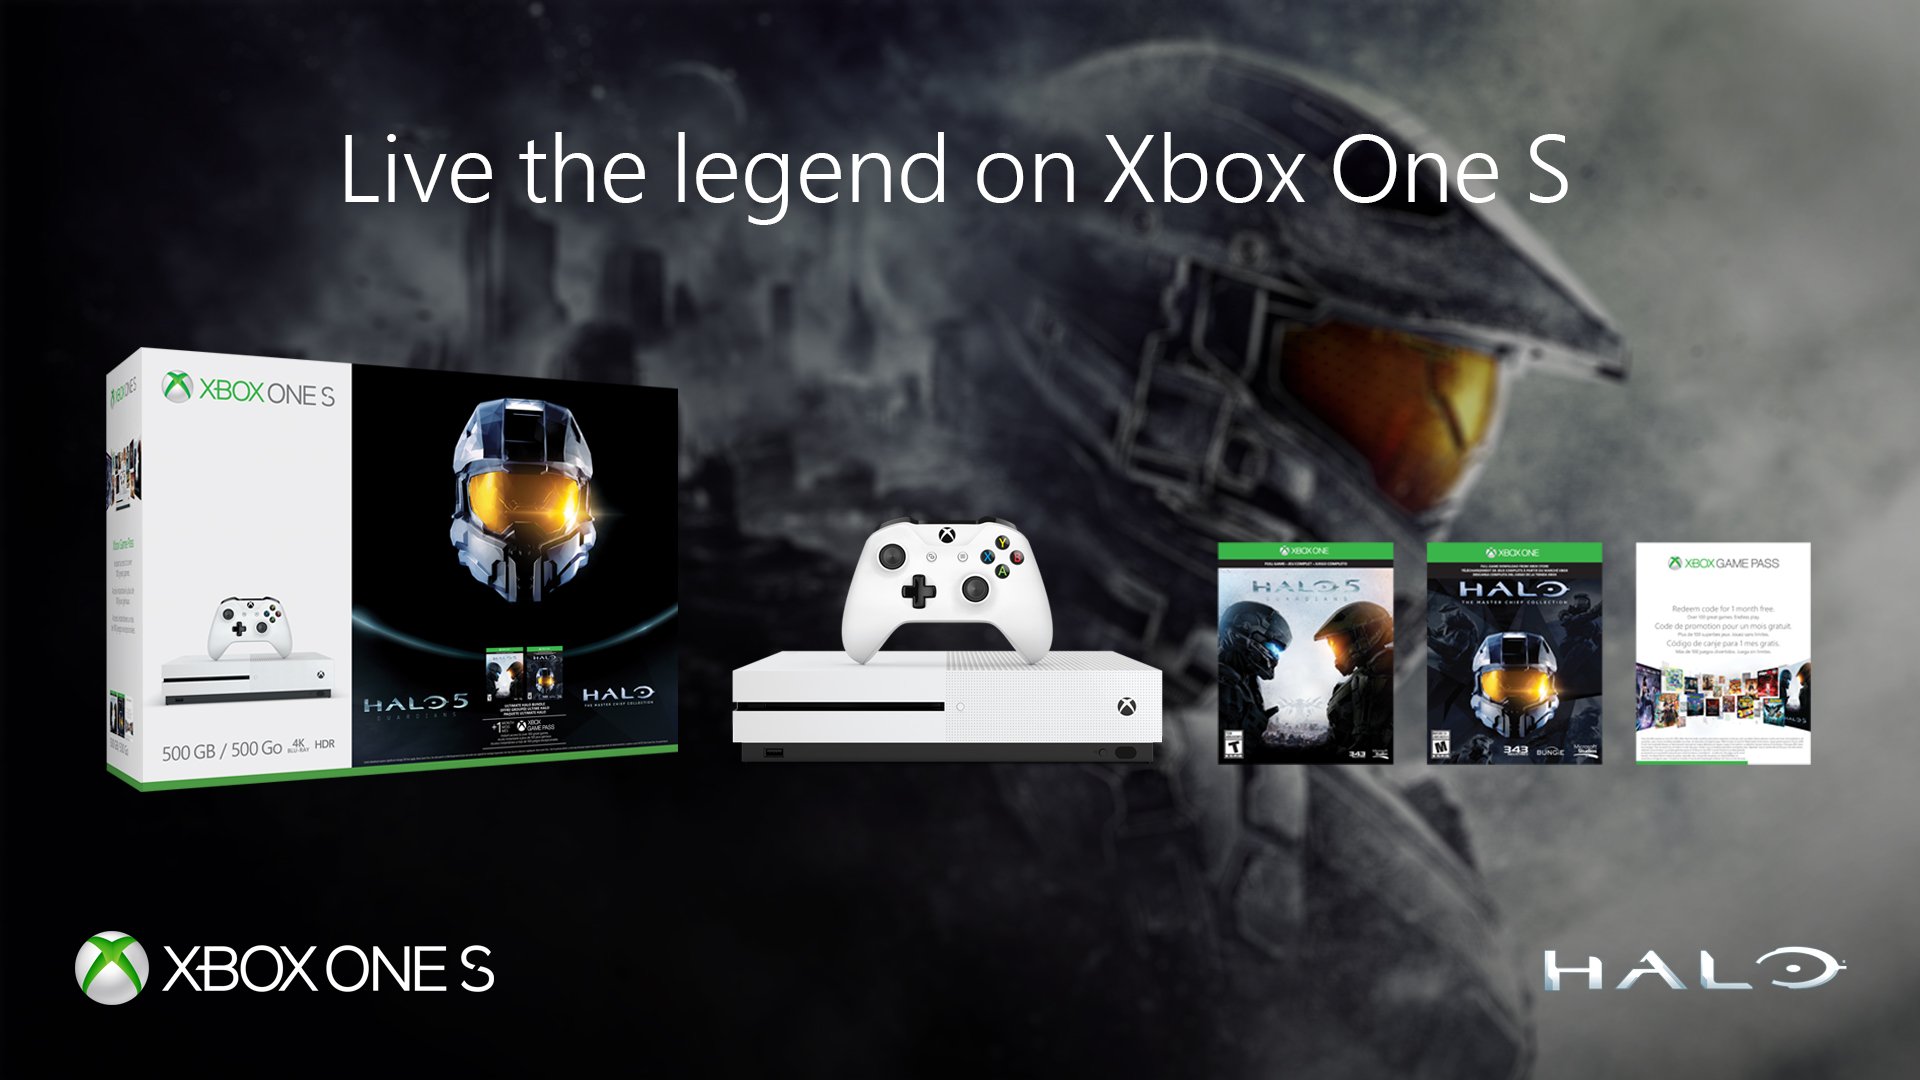 Halo: The Master Chief Collection - The Ultimate Halo Experience